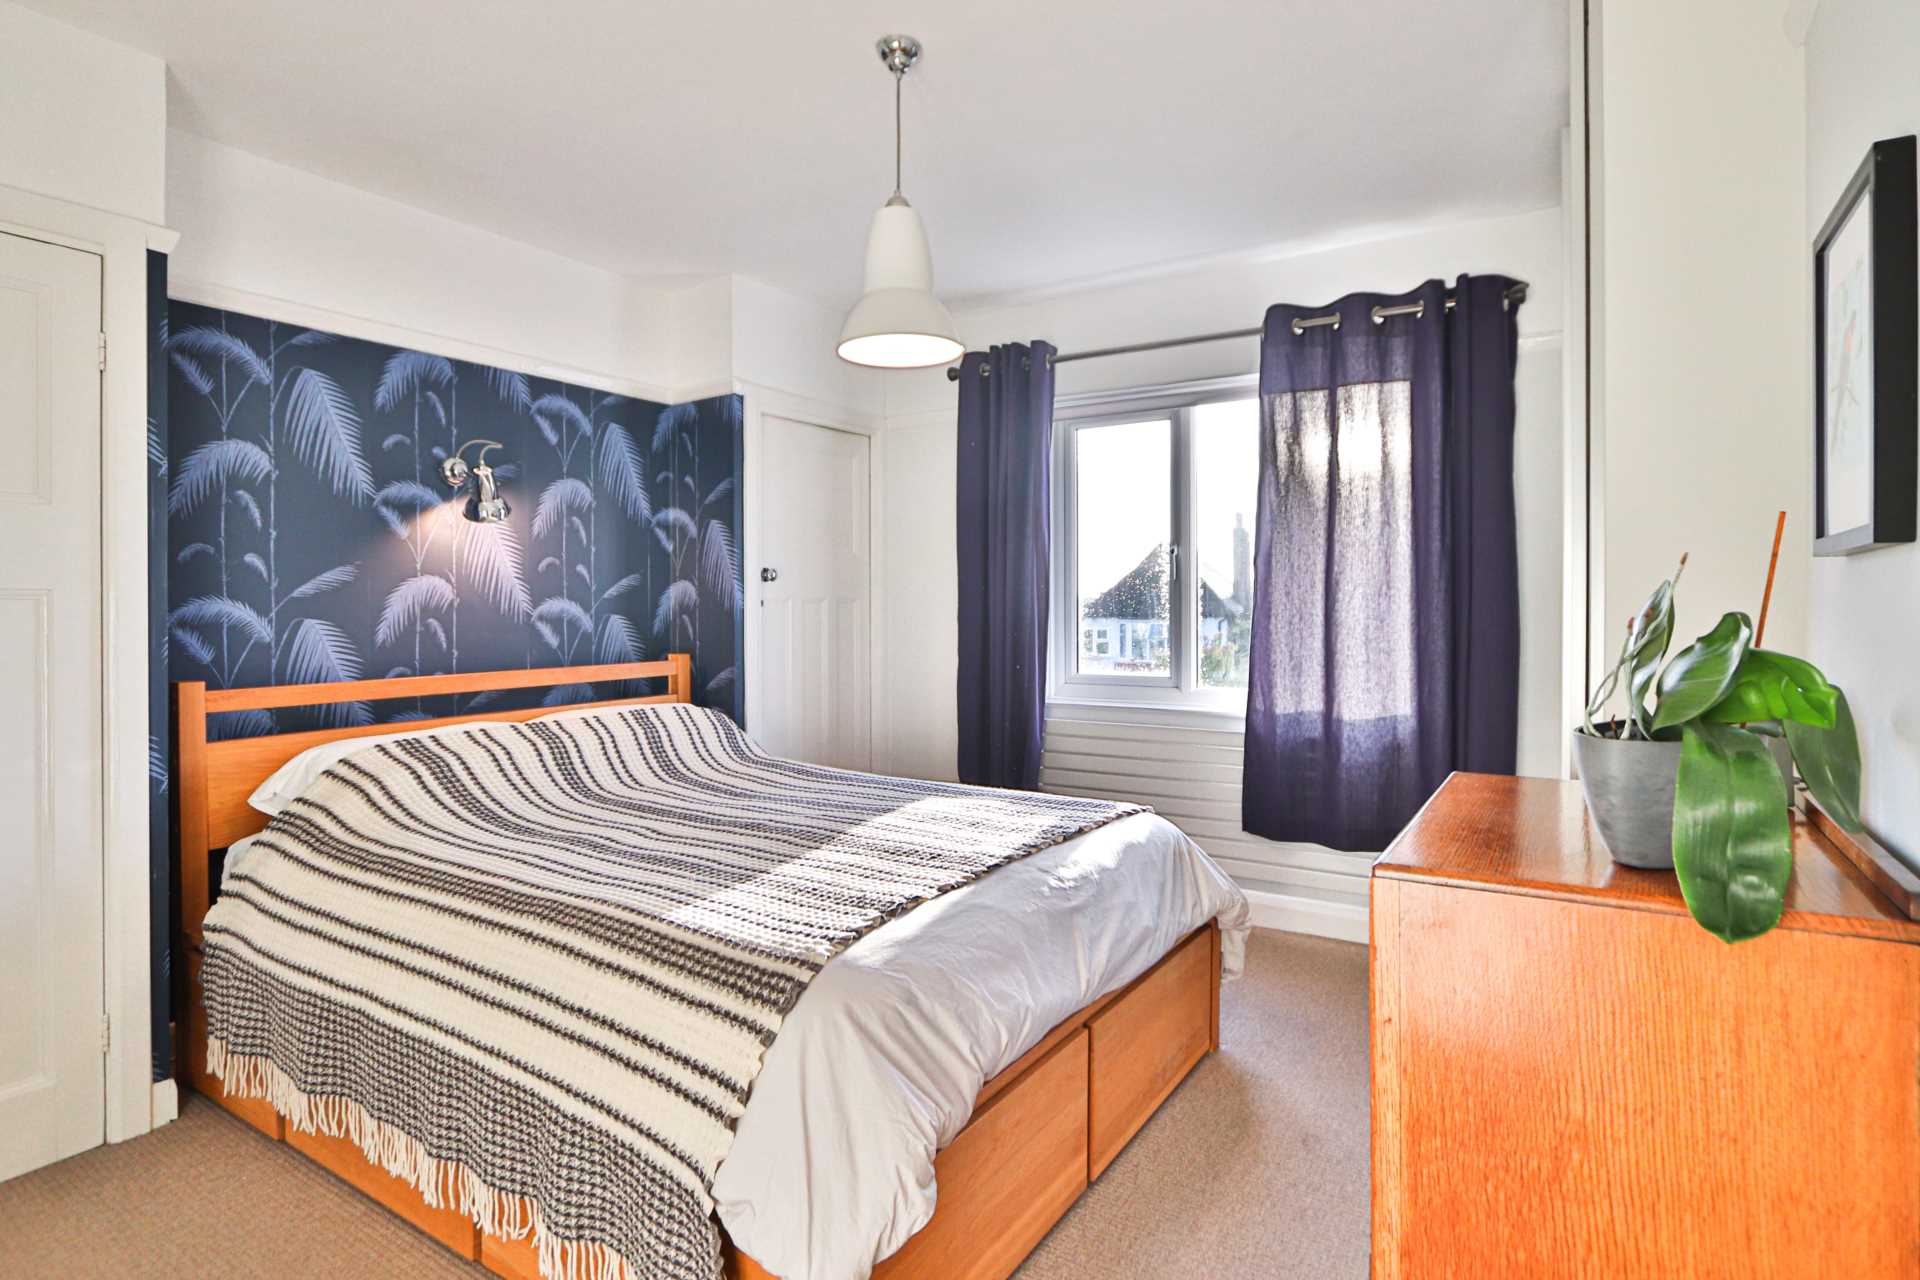 Knightwood Crescent, New Malden, Image 15